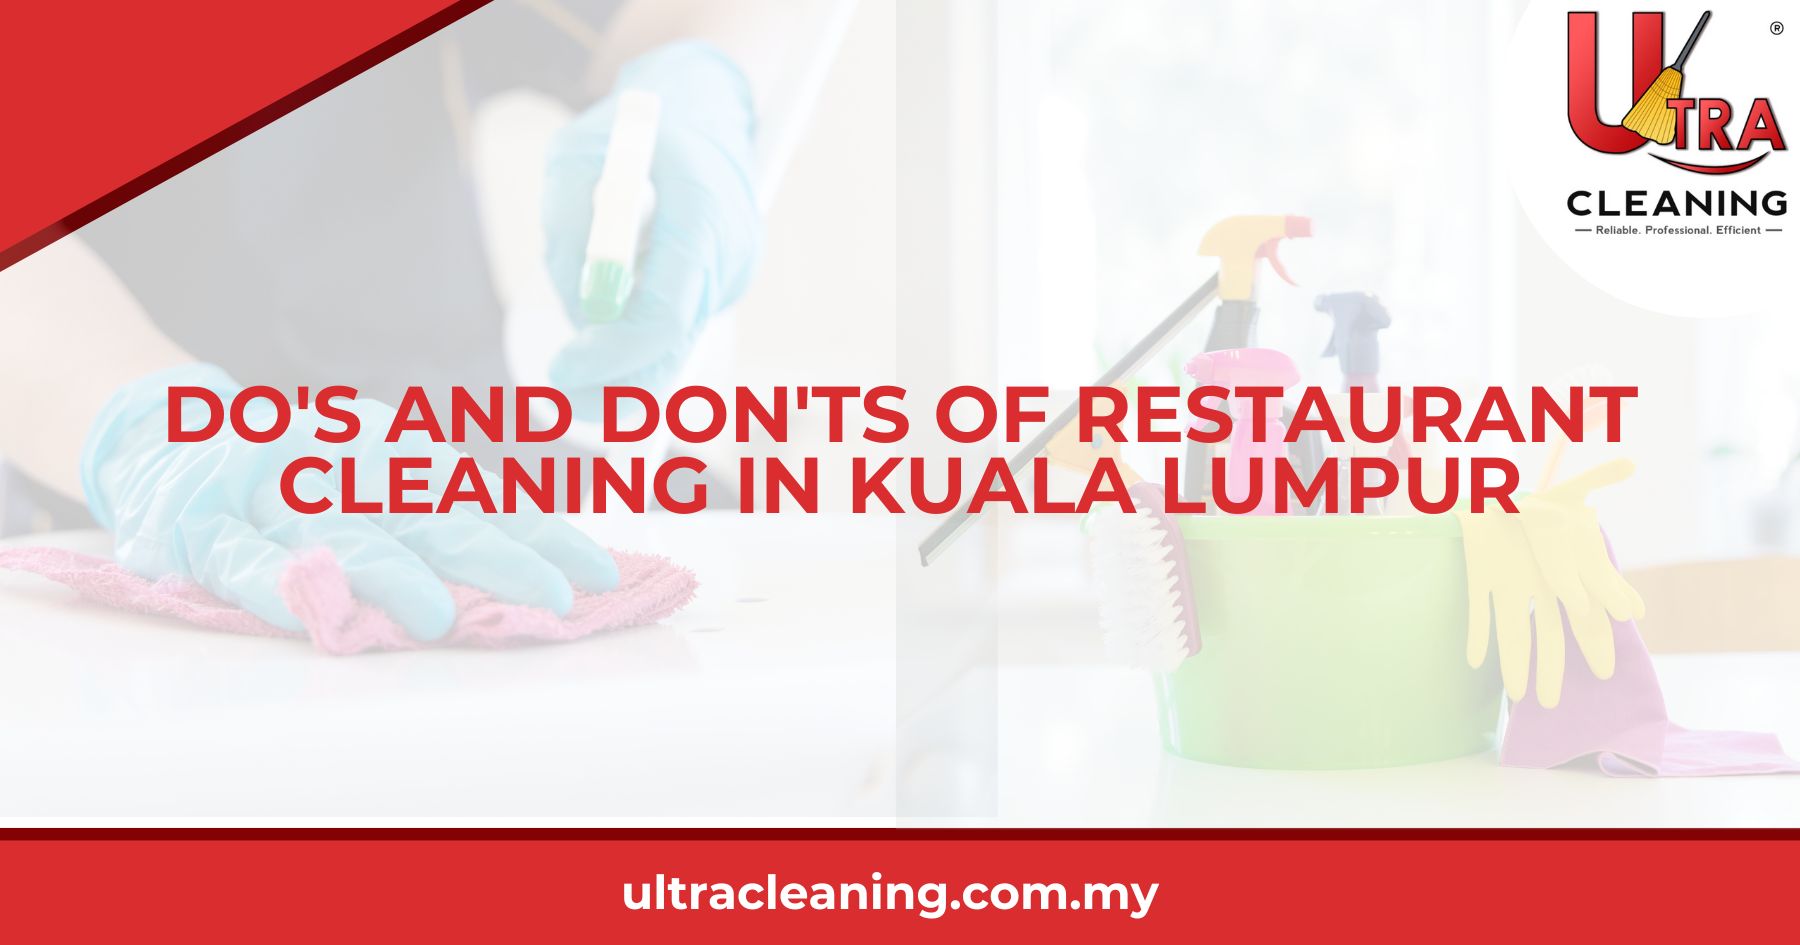 Do's and Don'ts of Restaurant Cleaning in Kuala Lumpur